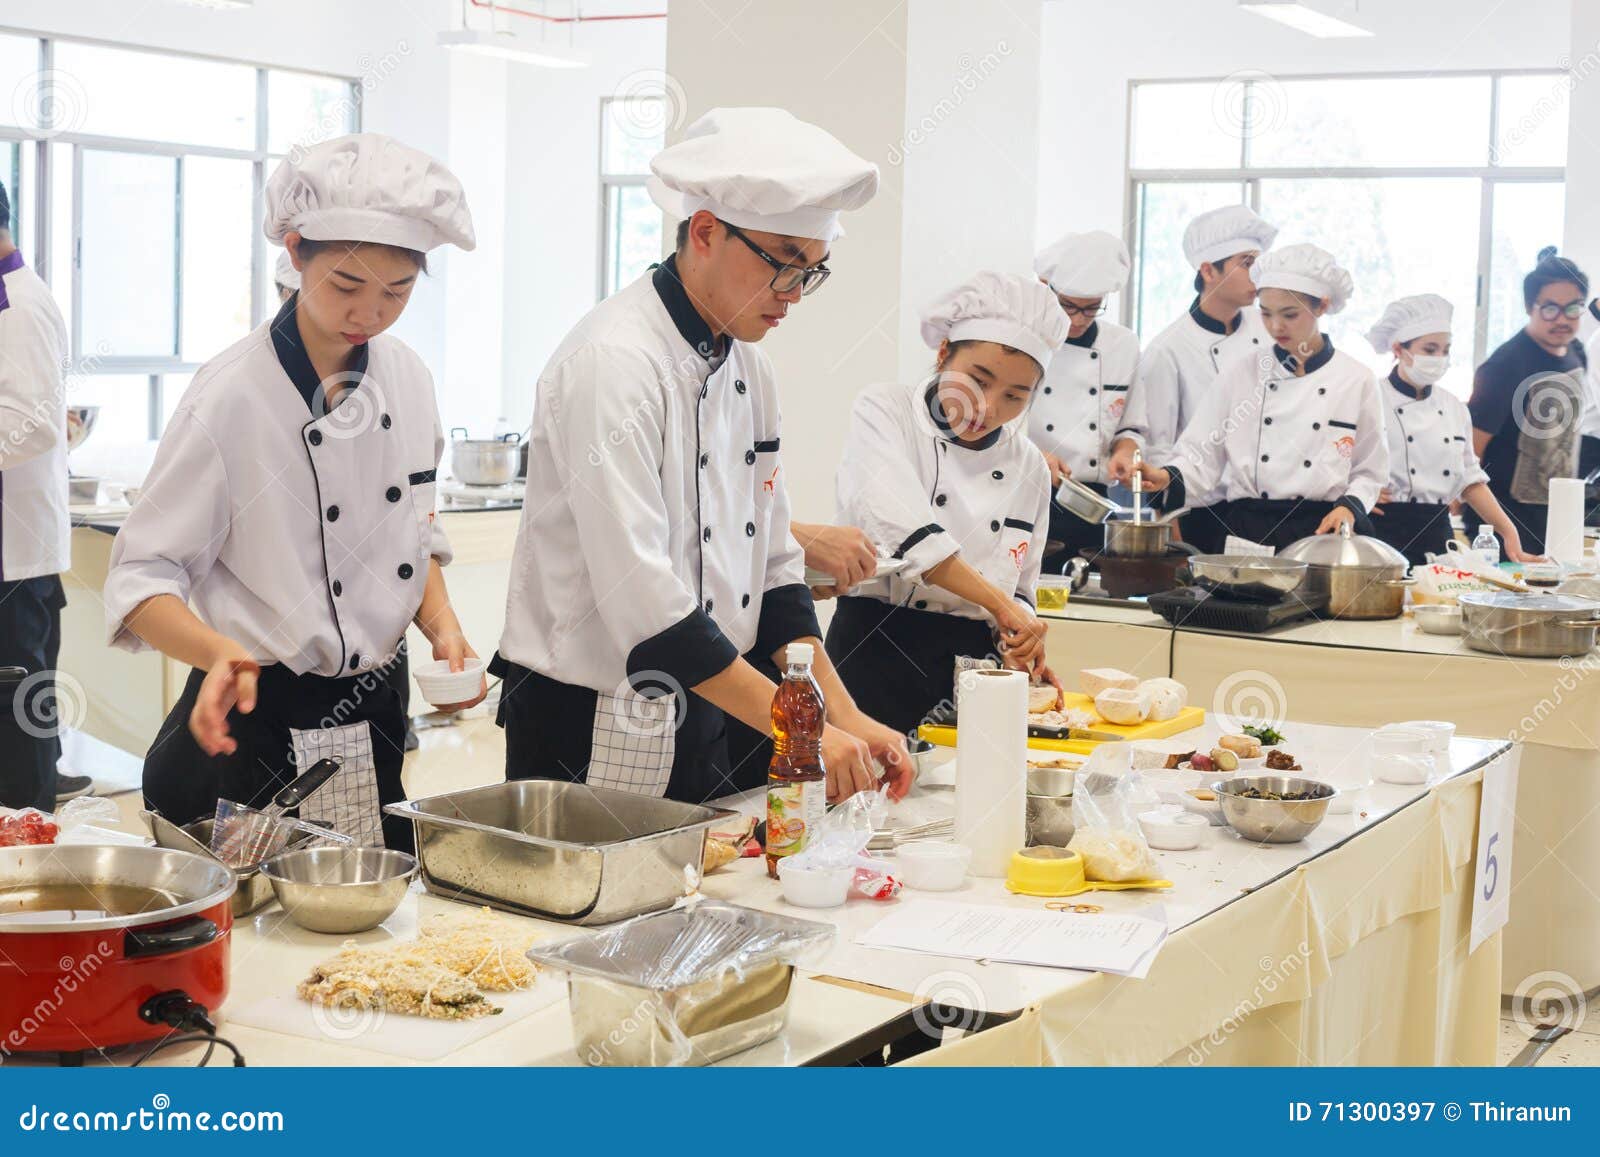 Cooks competition. Cookery Competition. Cooking Competition. Cookery Competition картинка для детей. Cooking Competition handouts.